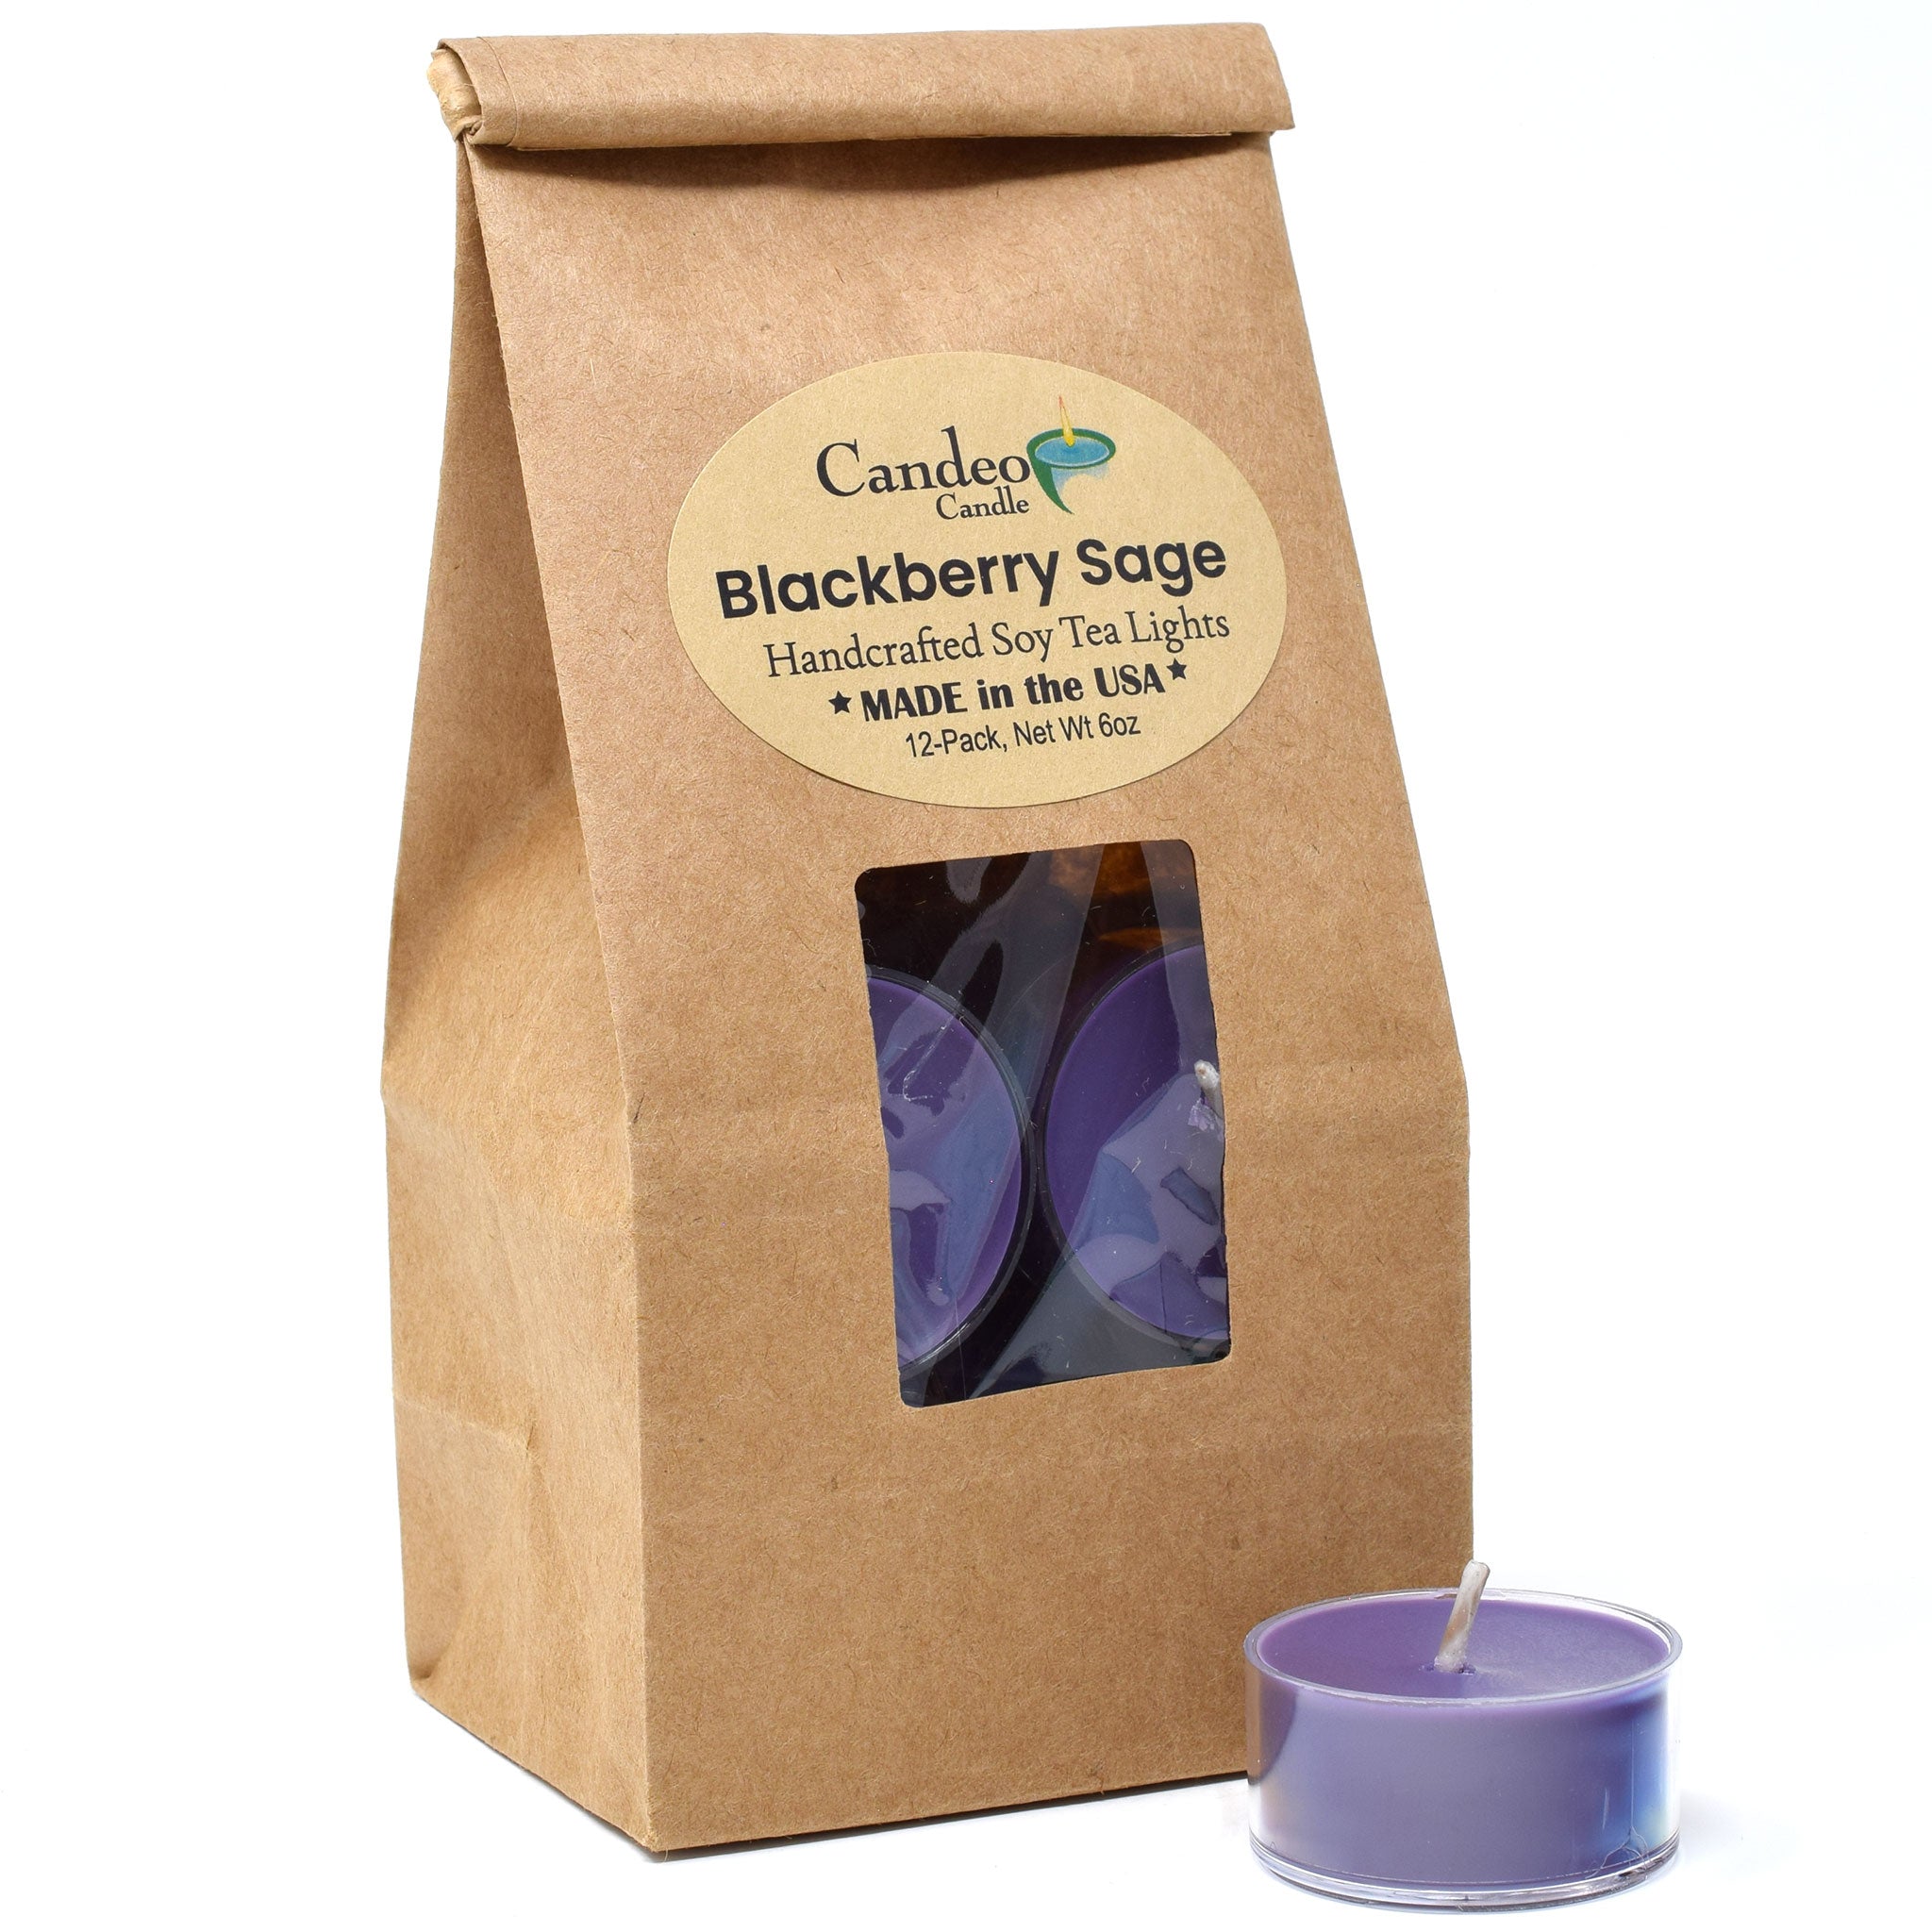 Blackberry Sage, Soy Tea Light 12-Pack - Candeo Candle